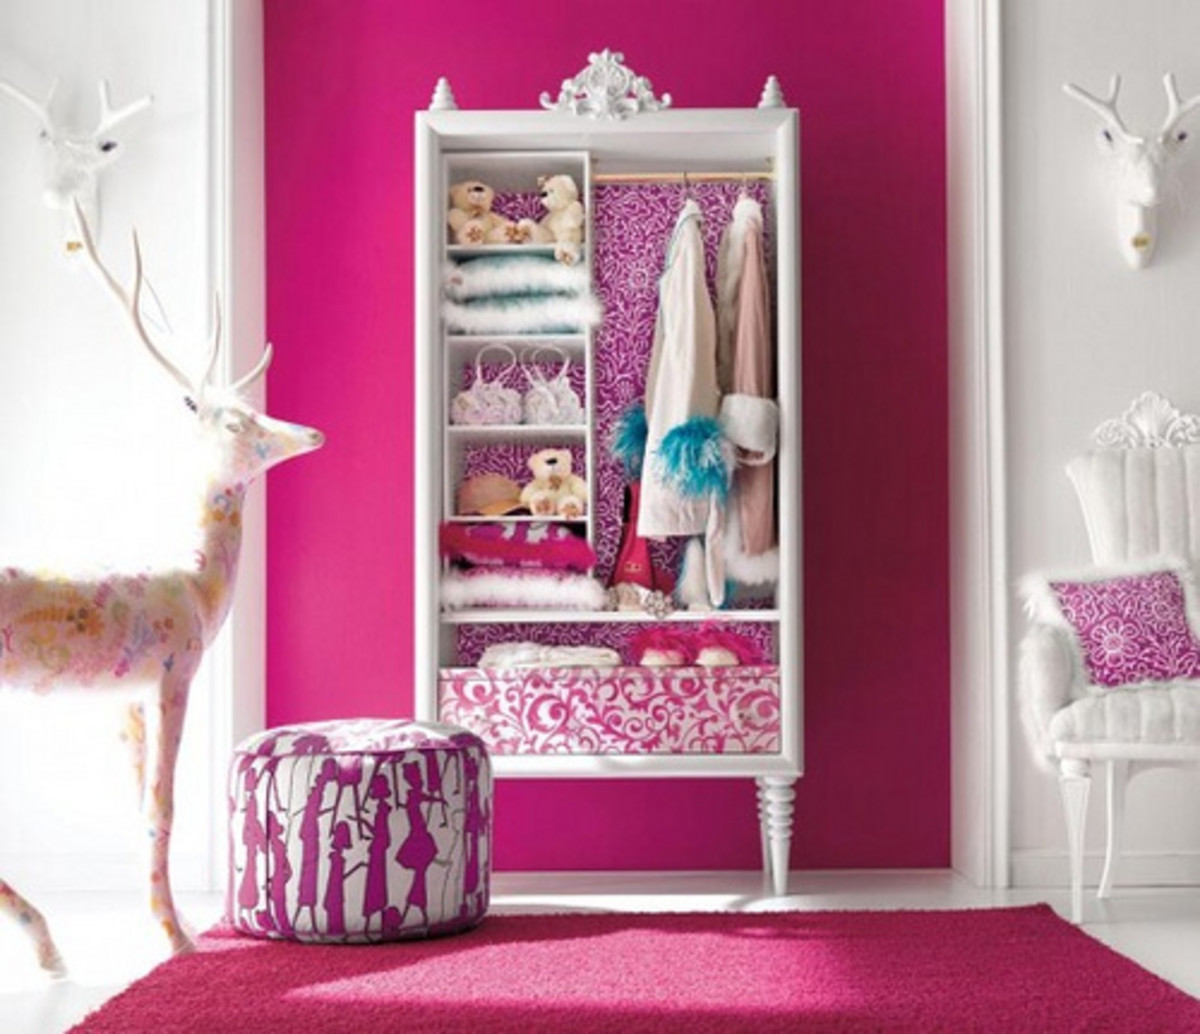 Pillows, curtains, or other decorative pieces are good options if you'd like to get her something for her room. 